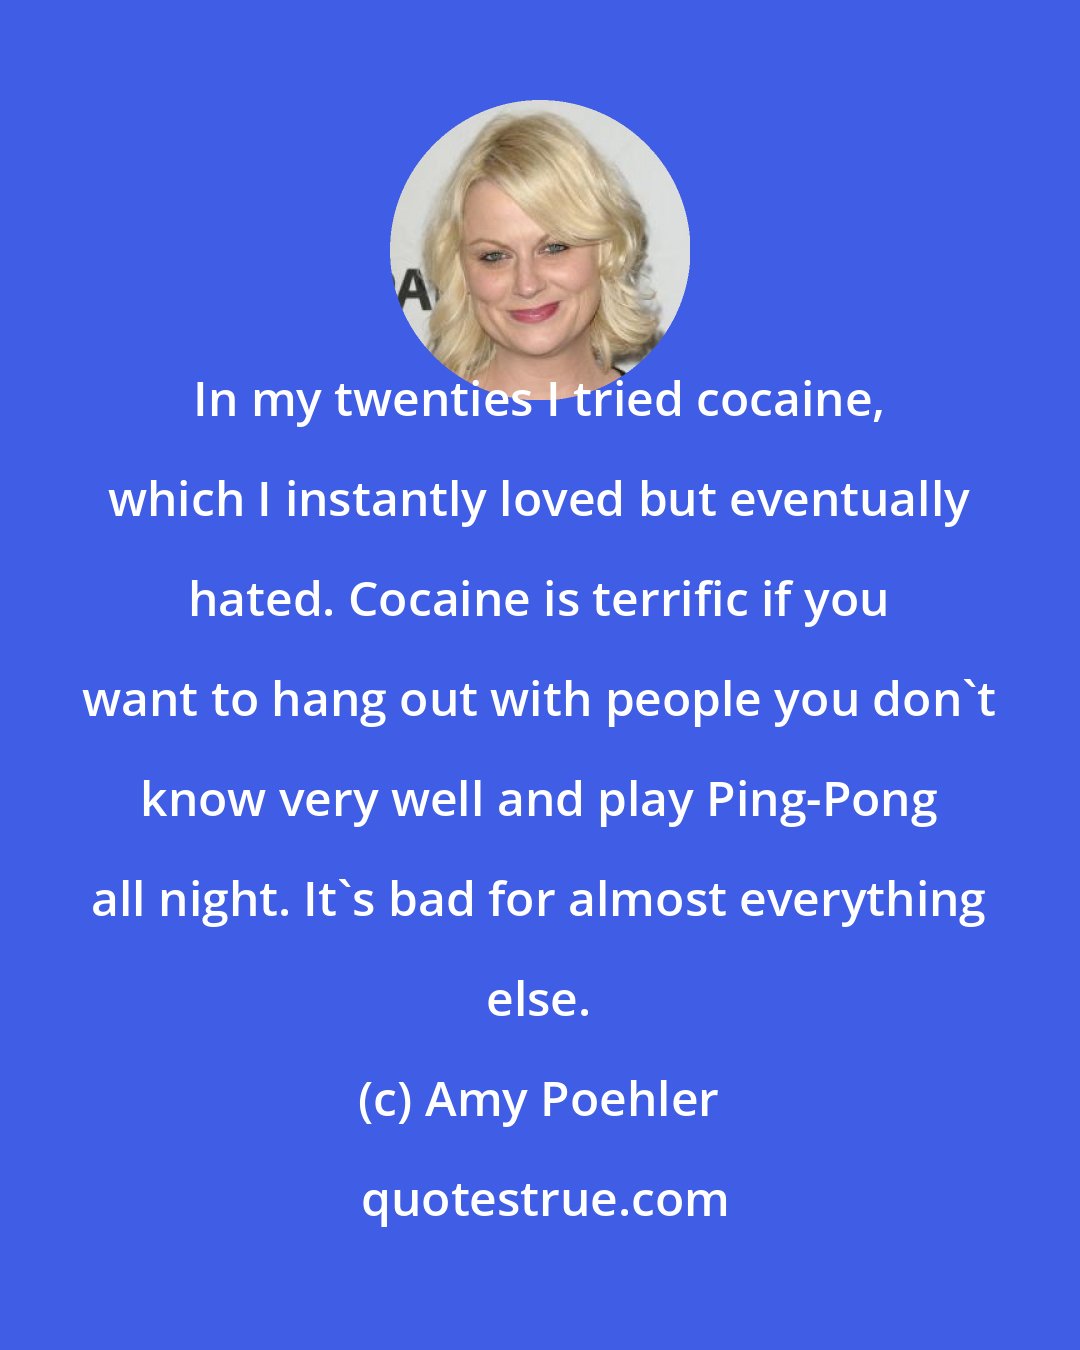 Amy Poehler: In my twenties I tried cocaine, which I instantly loved but eventually hated. Cocaine is terrific if you want to hang out with people you don't know very well and play Ping-Pong all night. It's bad for almost everything else.